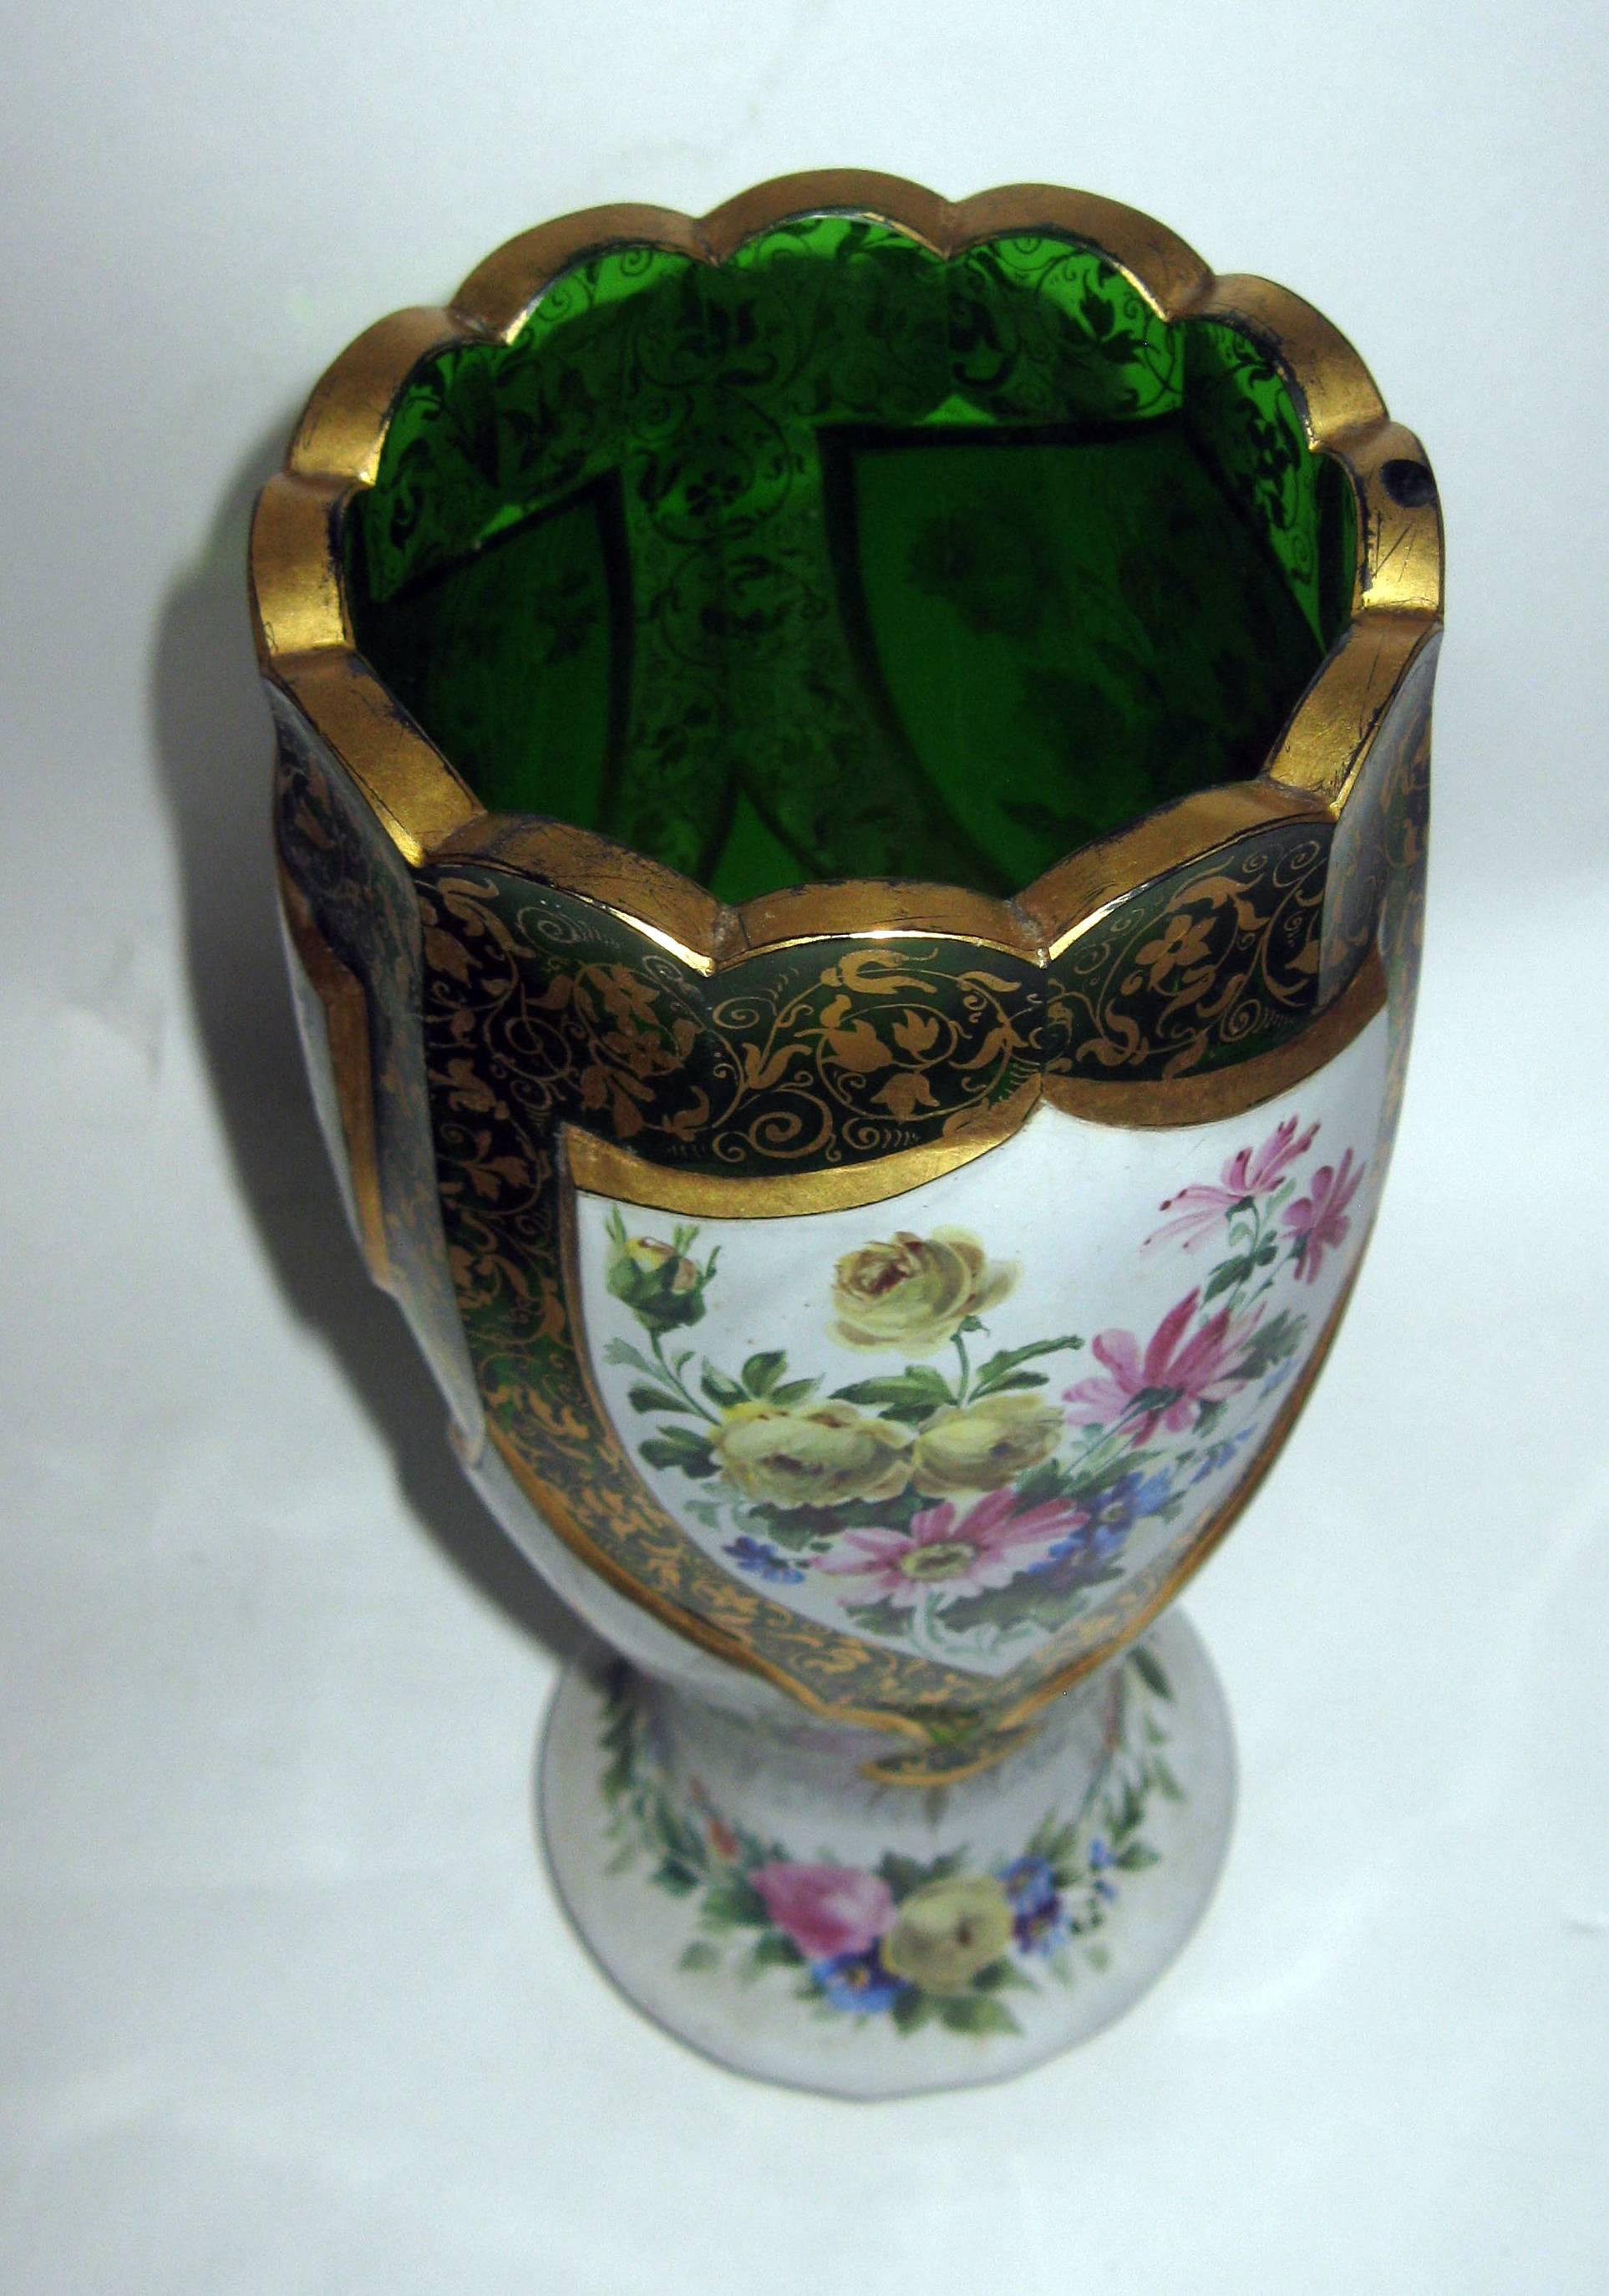 19th Century 19th century Moser Green Bohemian Art Glass Overlay Vase with Roses